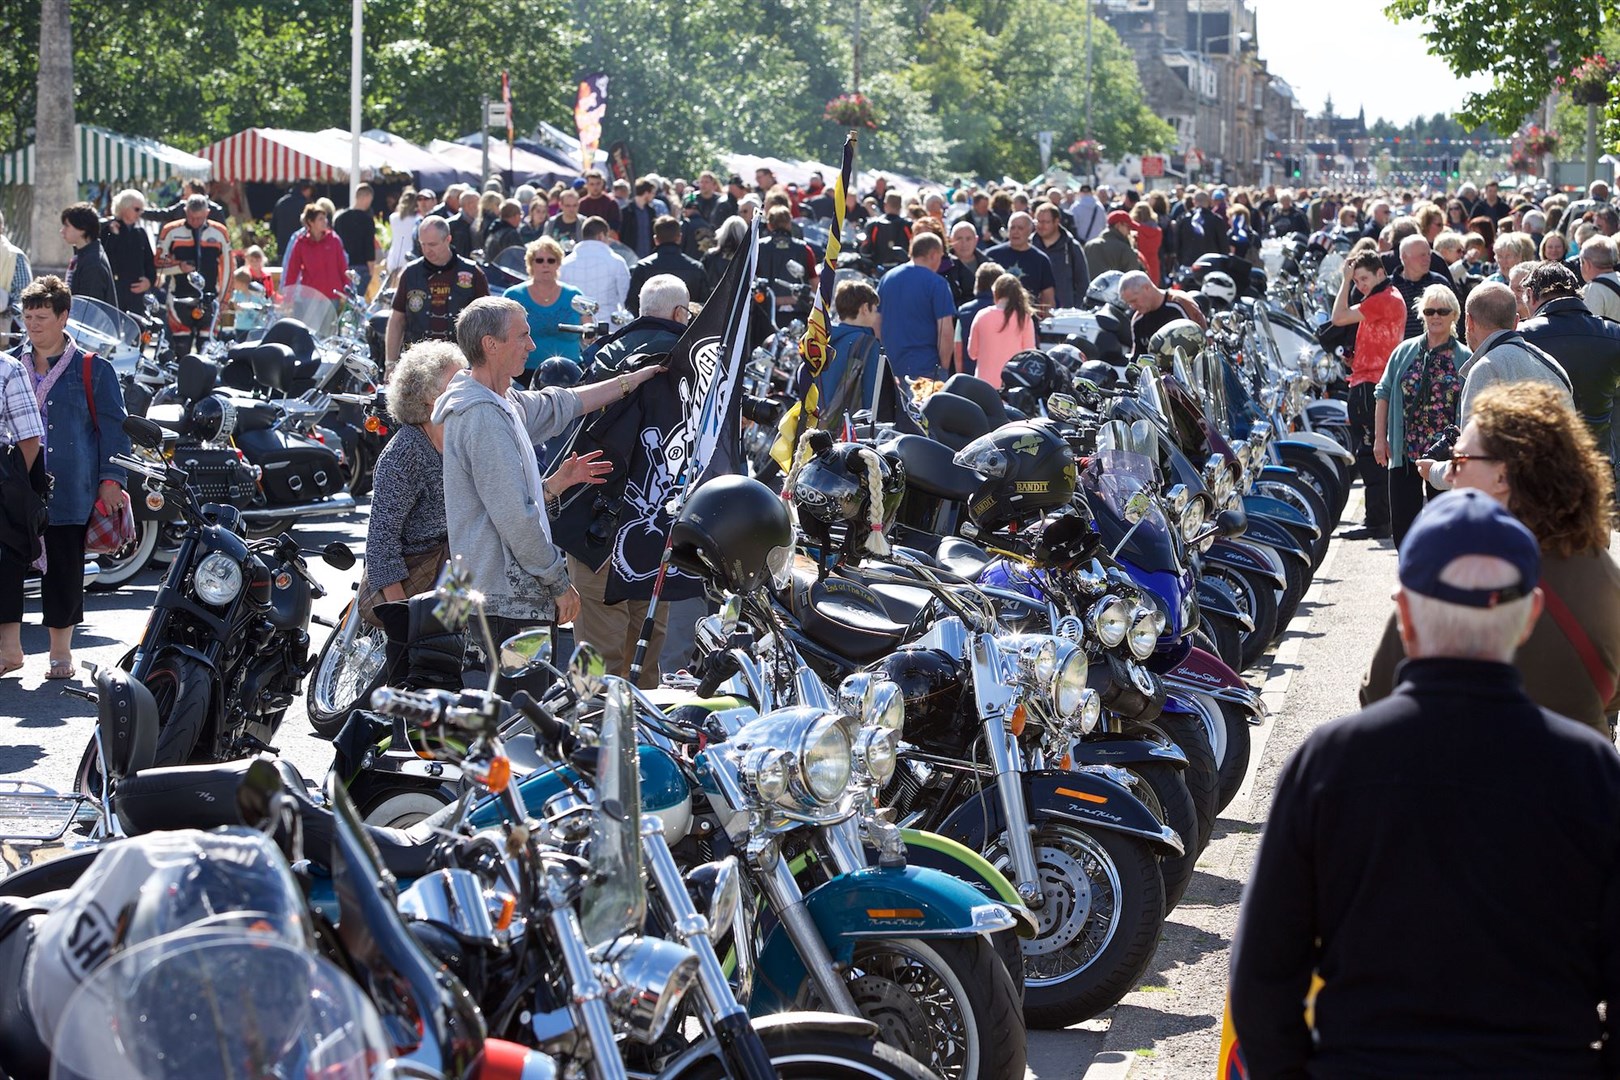 Thunder in the Glens is the biggest Harley Davidson gathering of its kind in the UK. The ride-out takes the bikers out into the strath and there is a long-established mass gathering in Grantown.